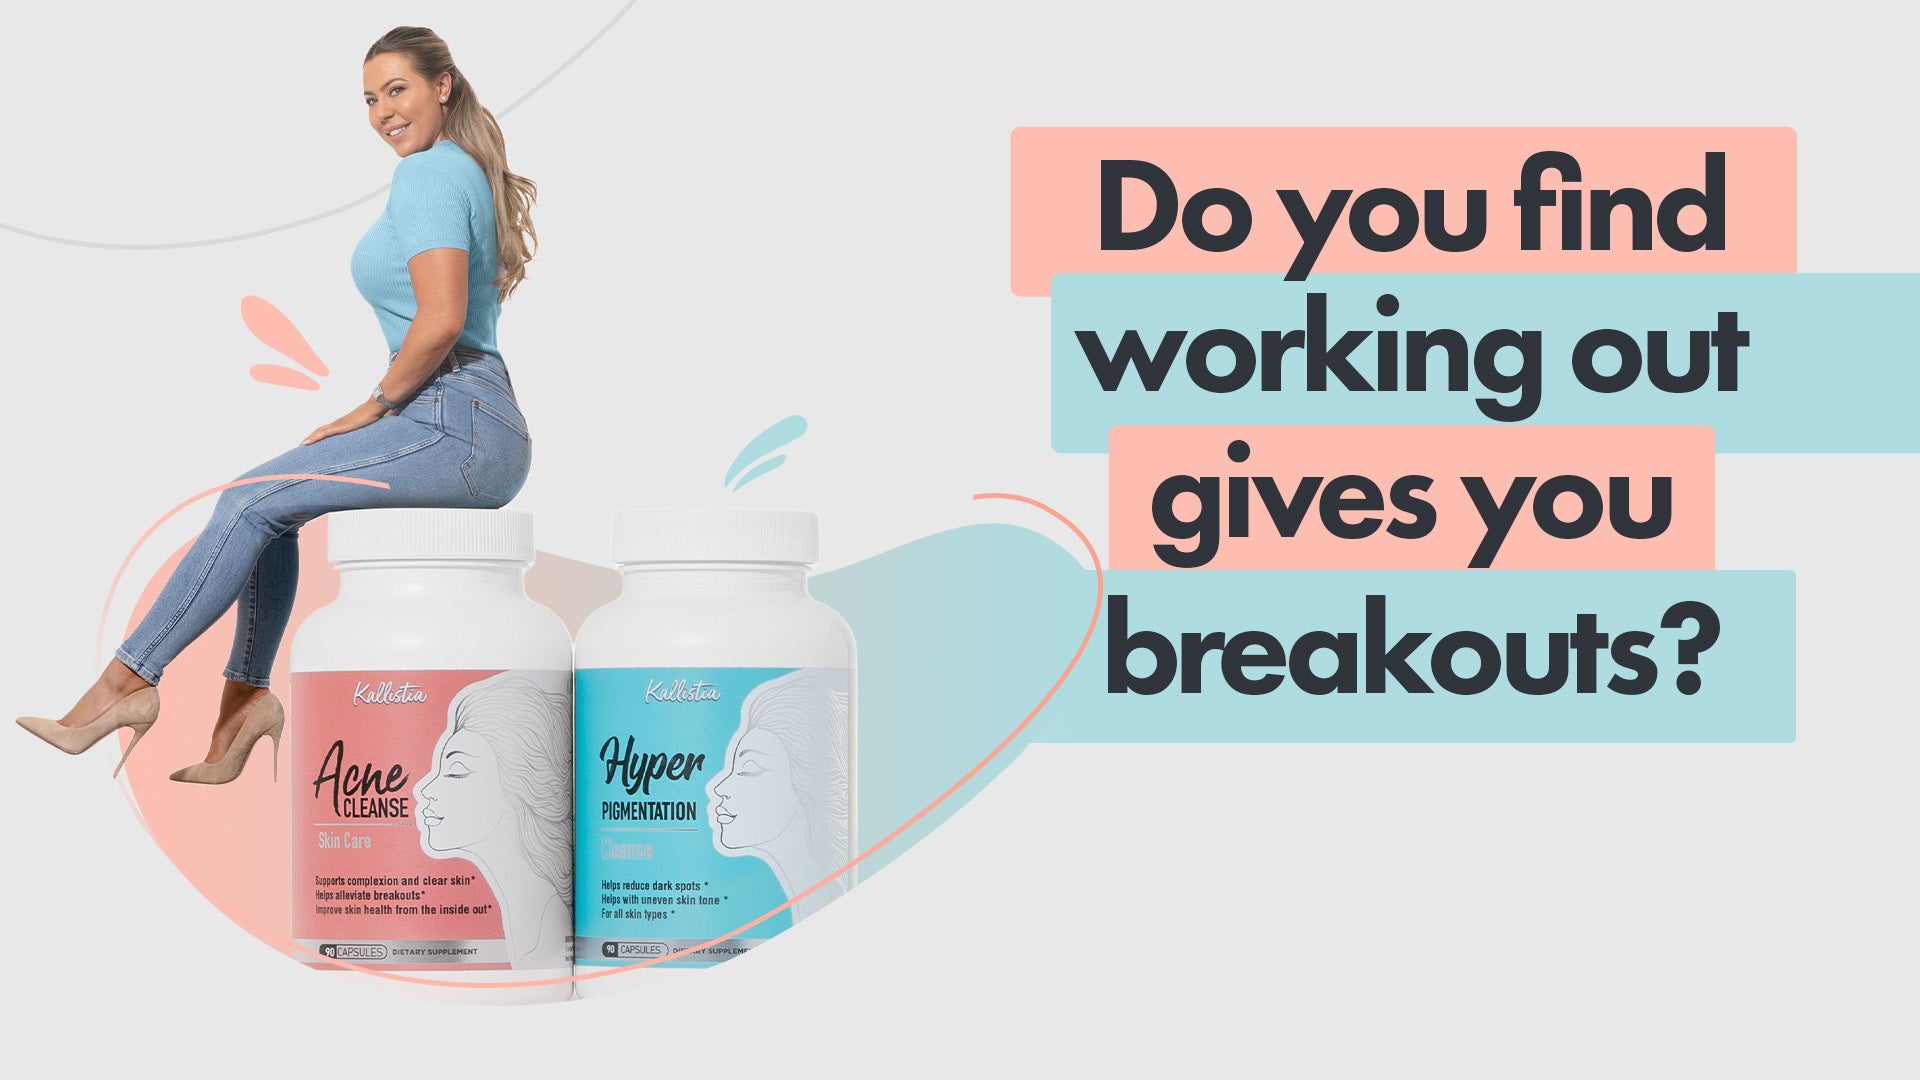 Do you find working out gives you breakouts?